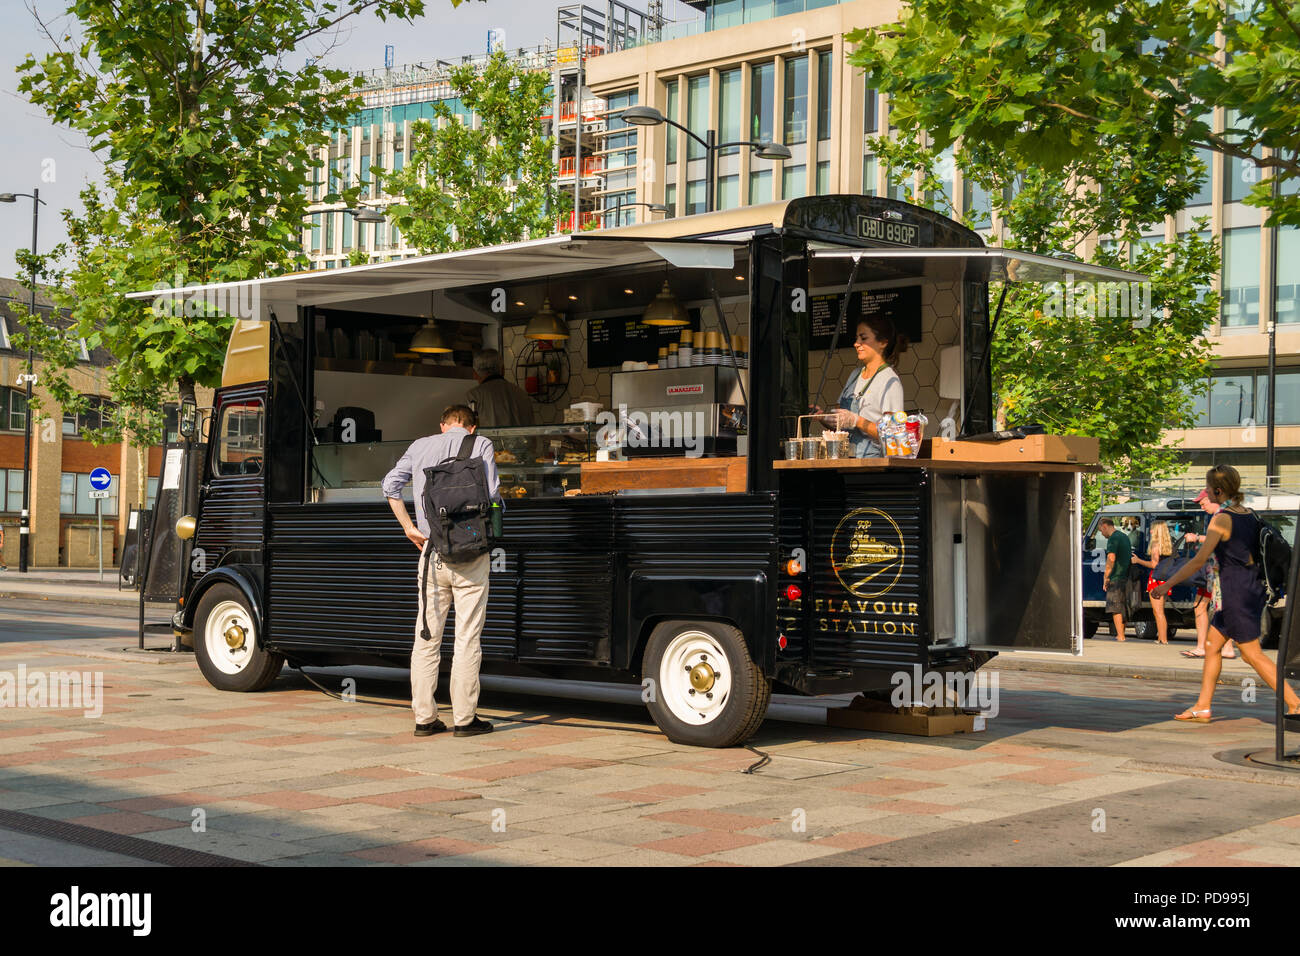 A mobile coffee and refreshments shop vehicle with customer browsing,  Cambridge Station Square, UK Stock Photo - Alamy